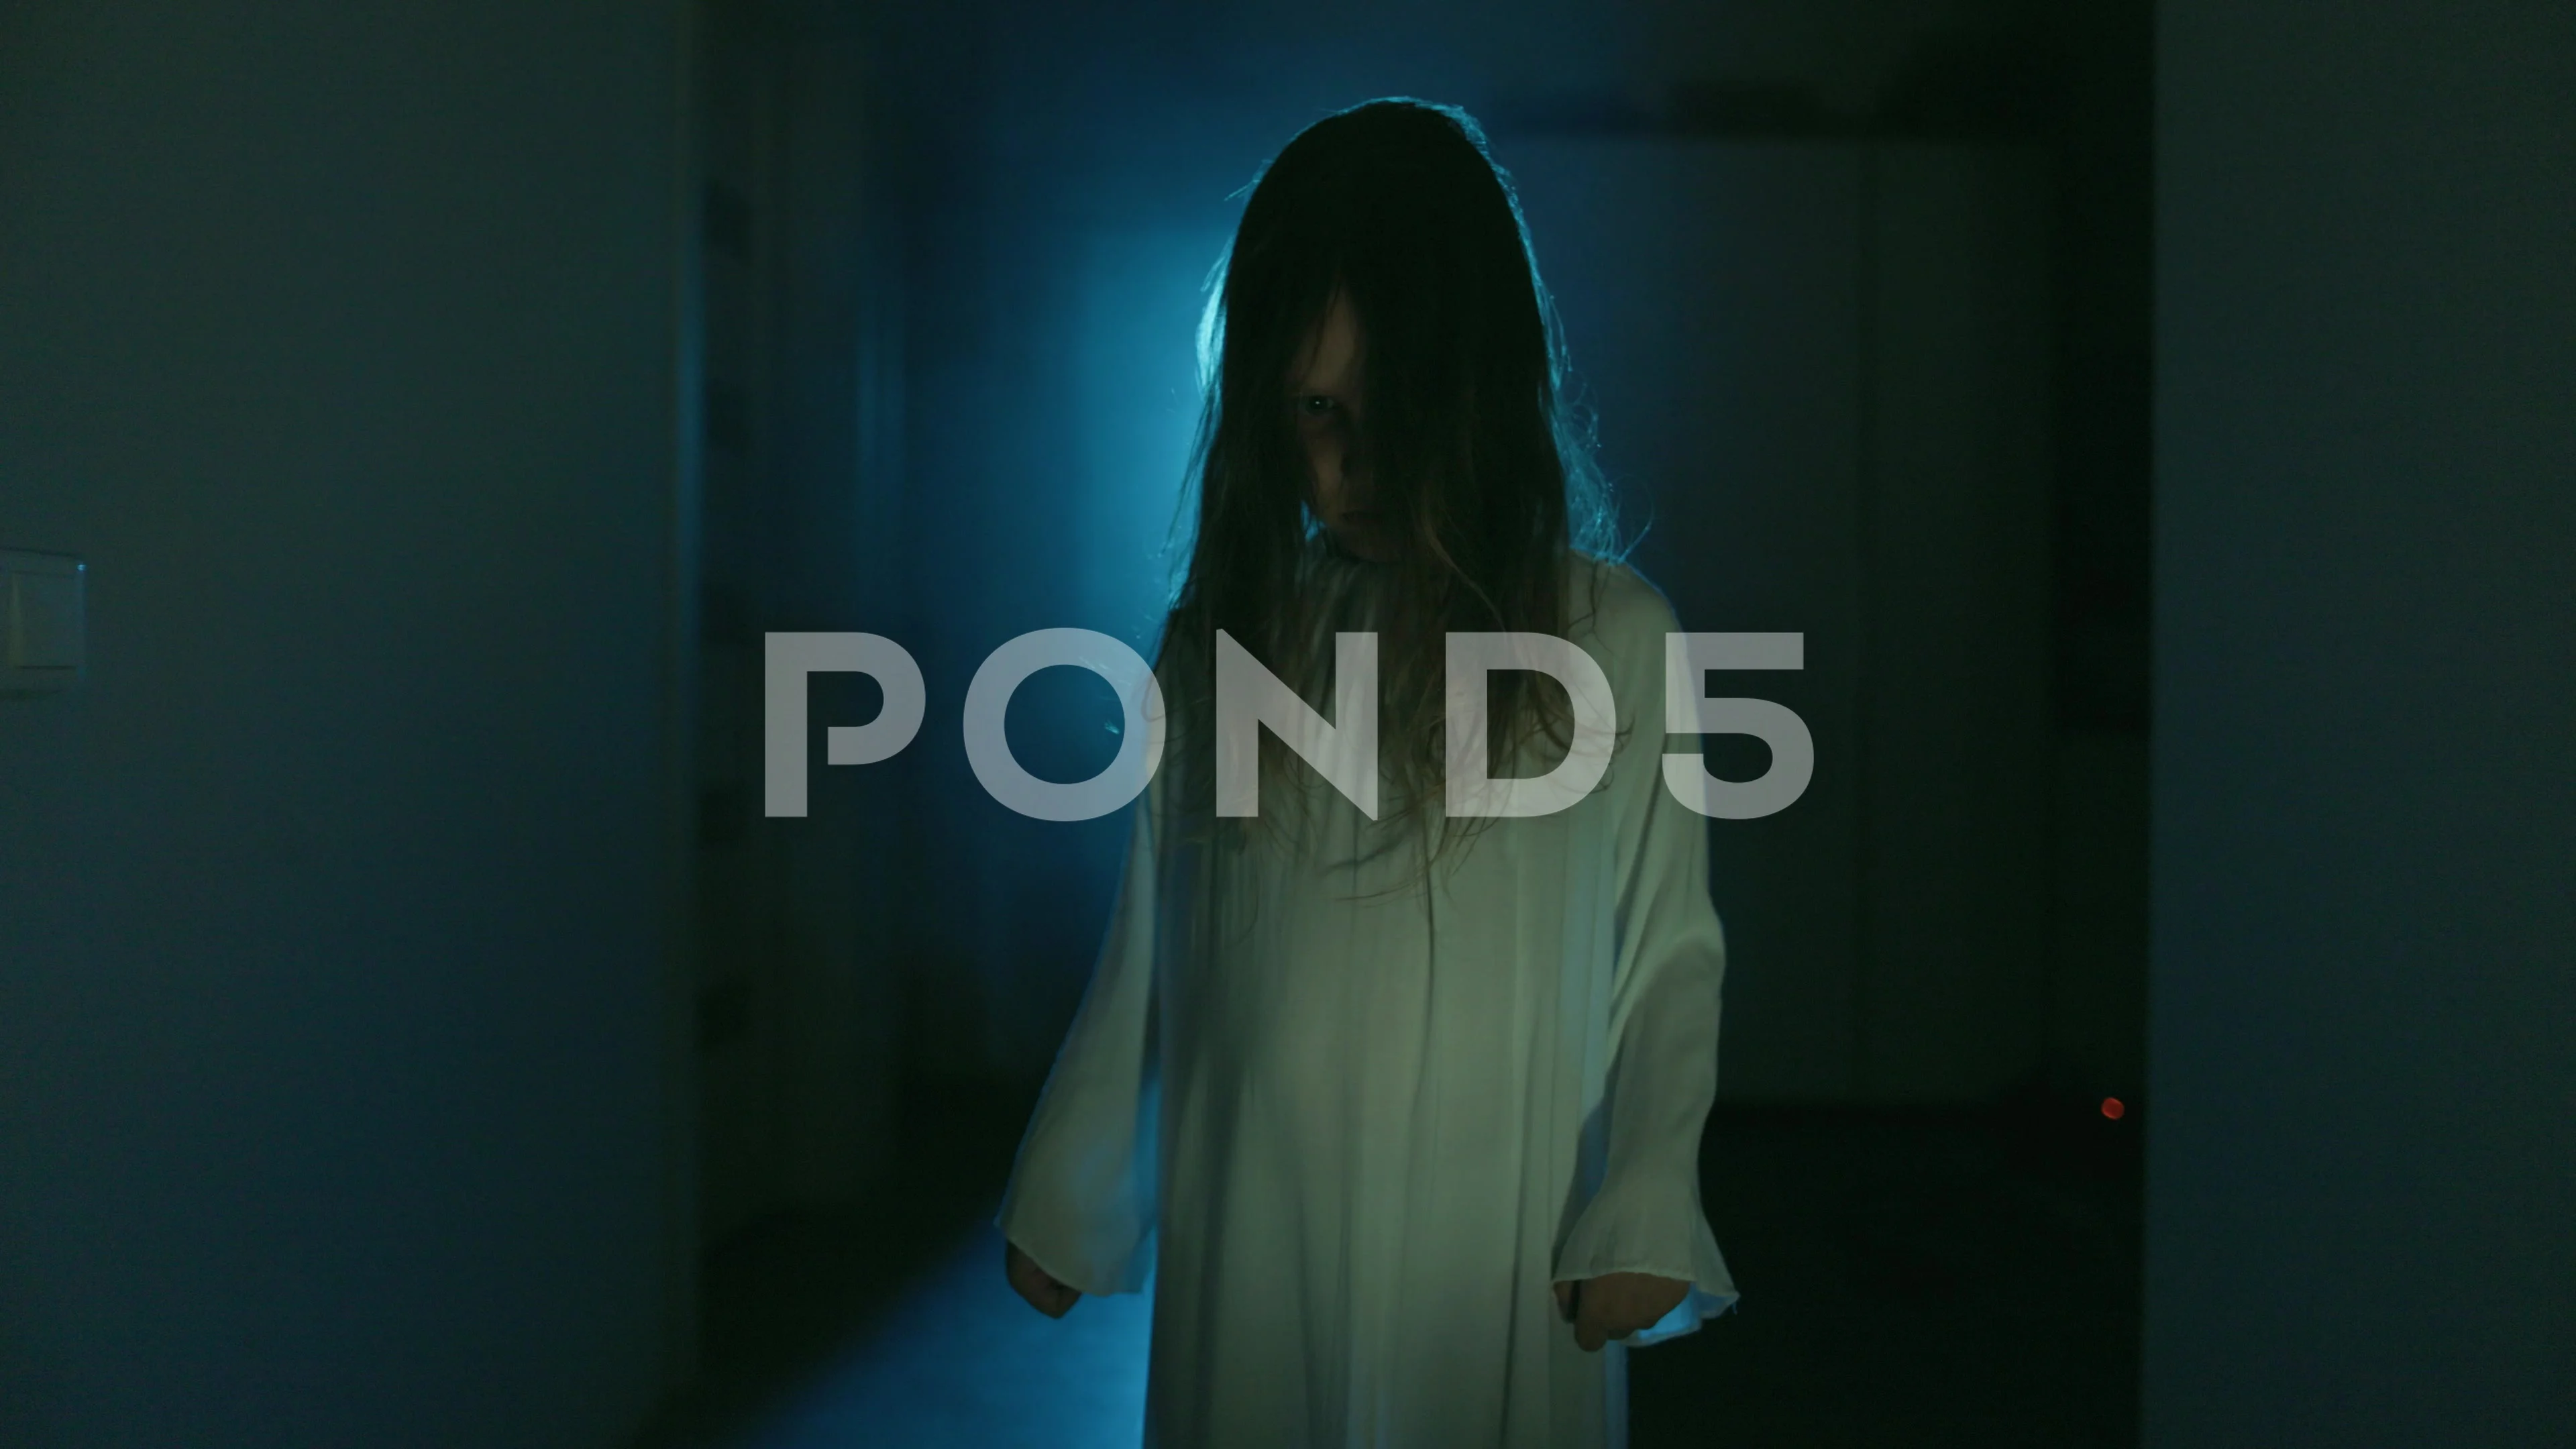 Ghost Girl In White Nightgown With Loose... | Stock Video | Pond5